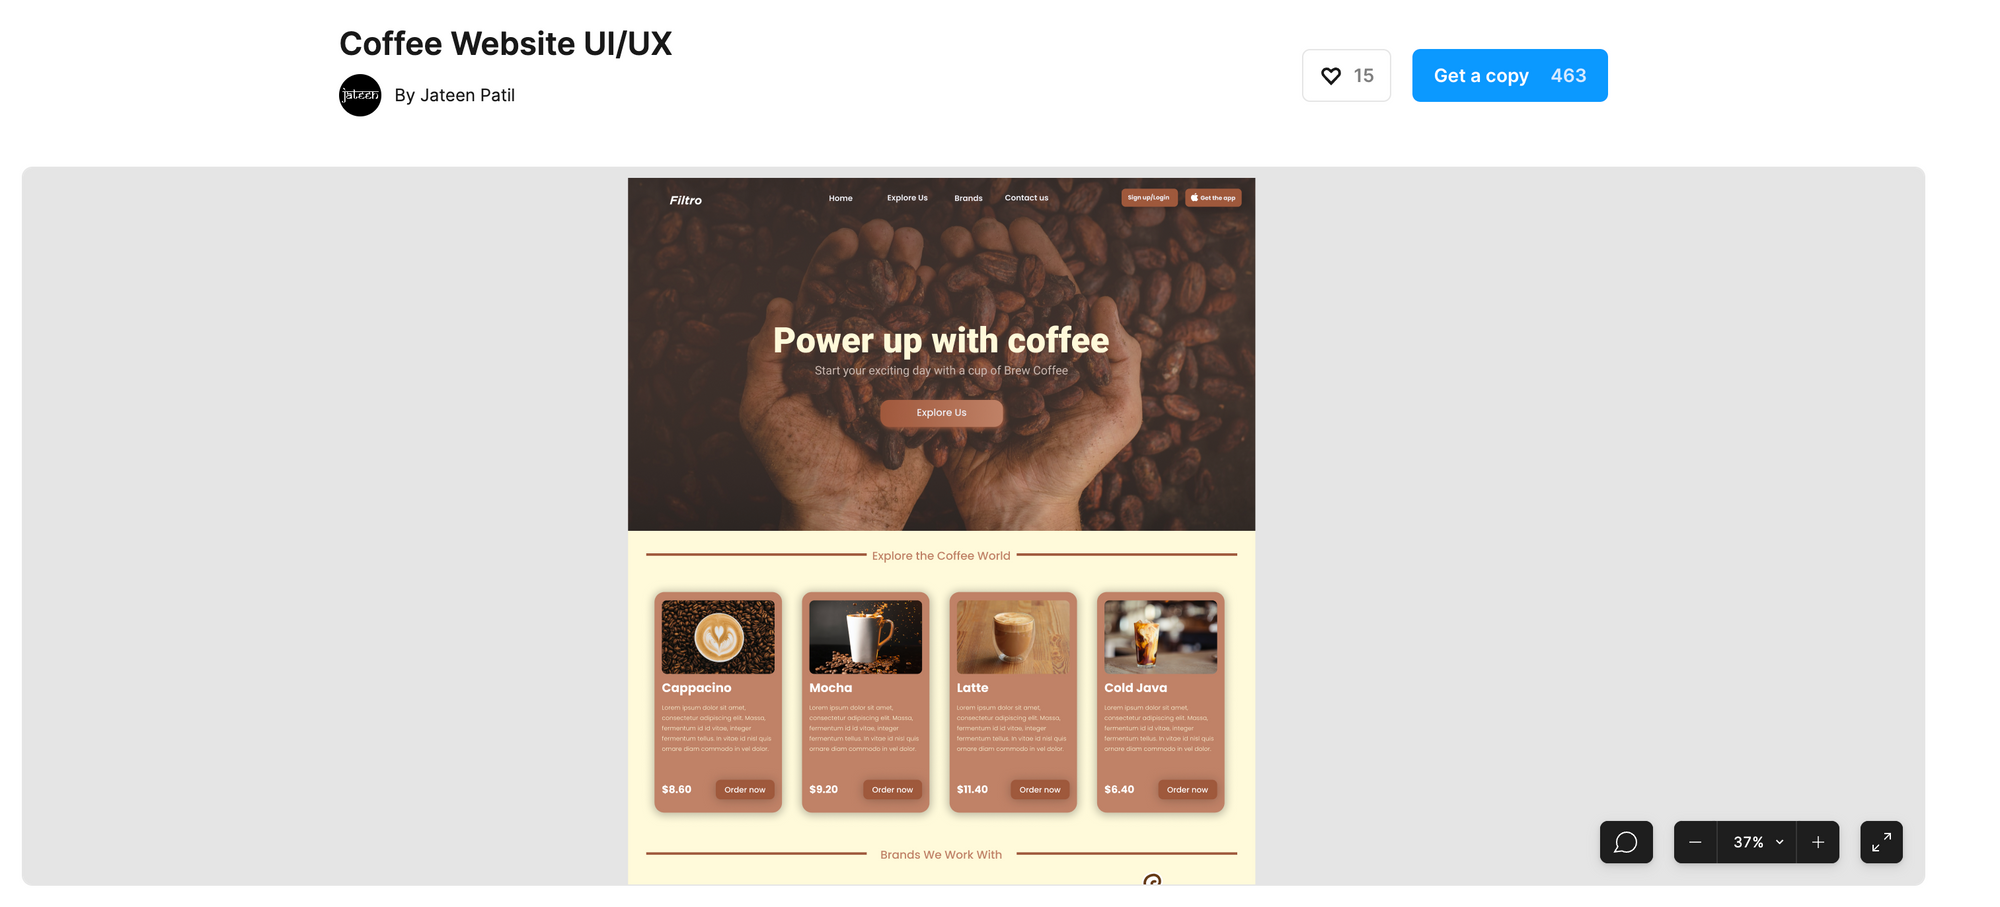 Coffee Website UI/UX available at Figma